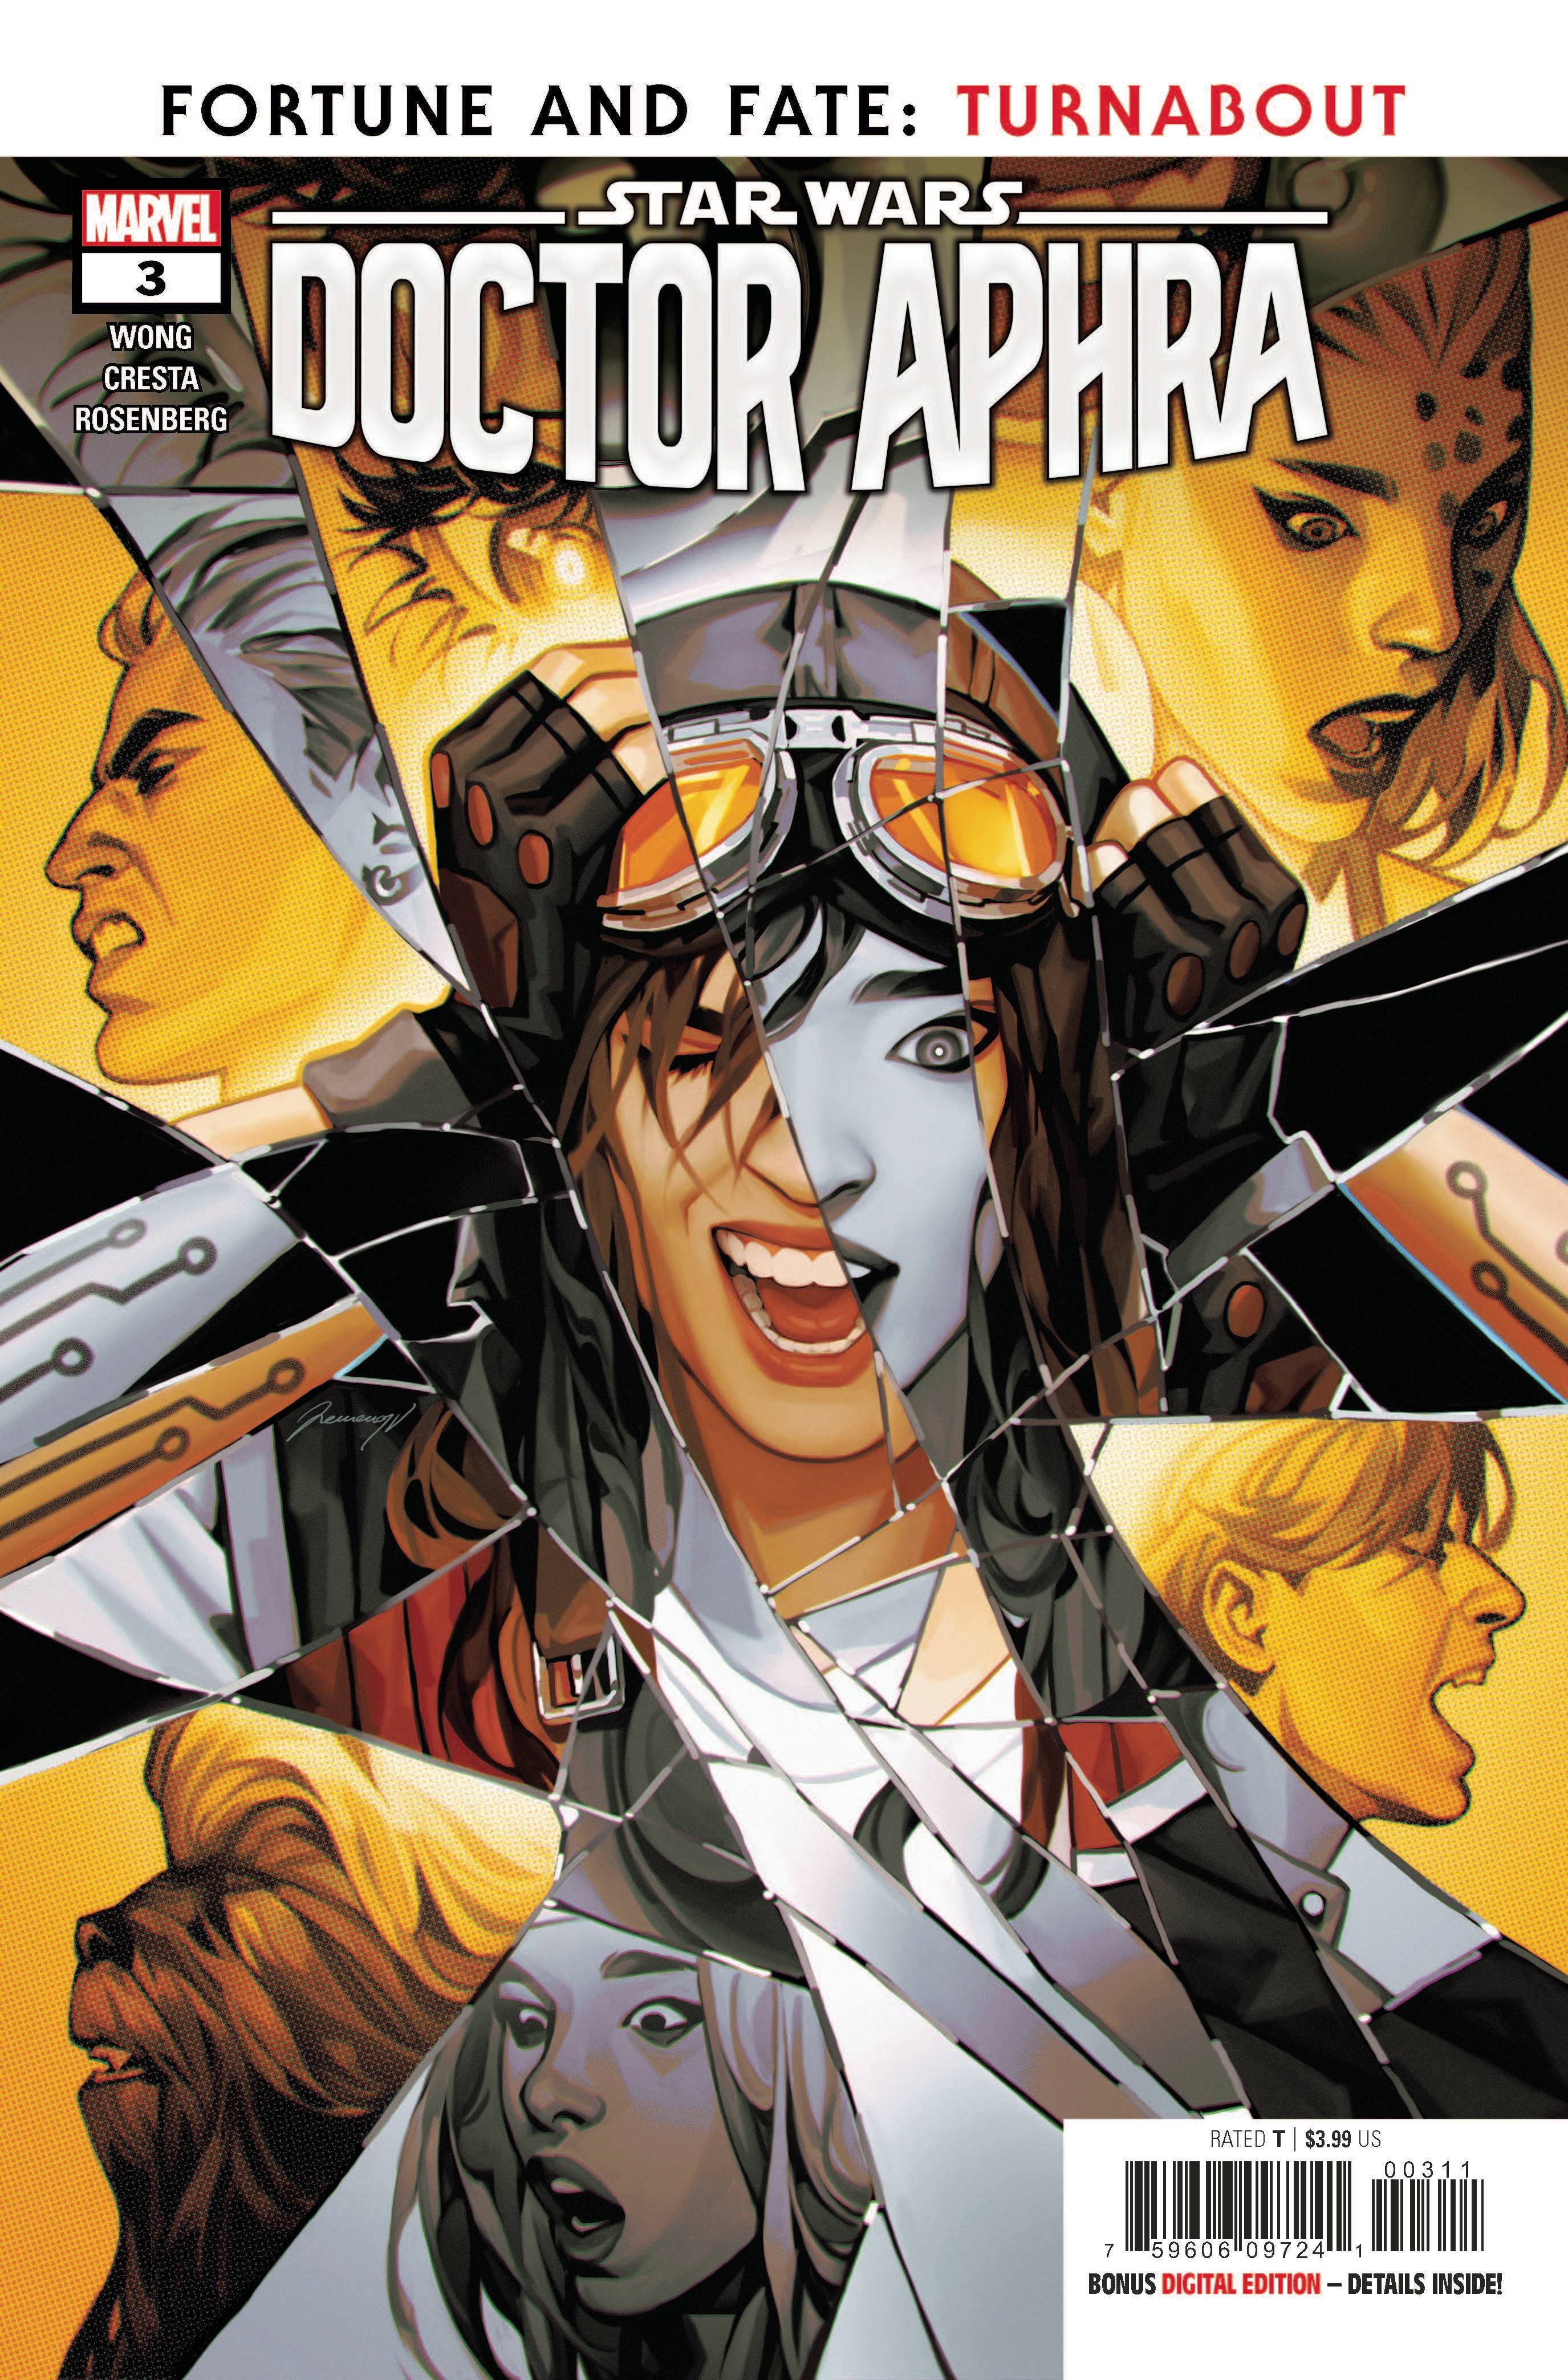 STAR WARS DOCTOR APHRA #3 | Game Master's Emporium (The New GME)